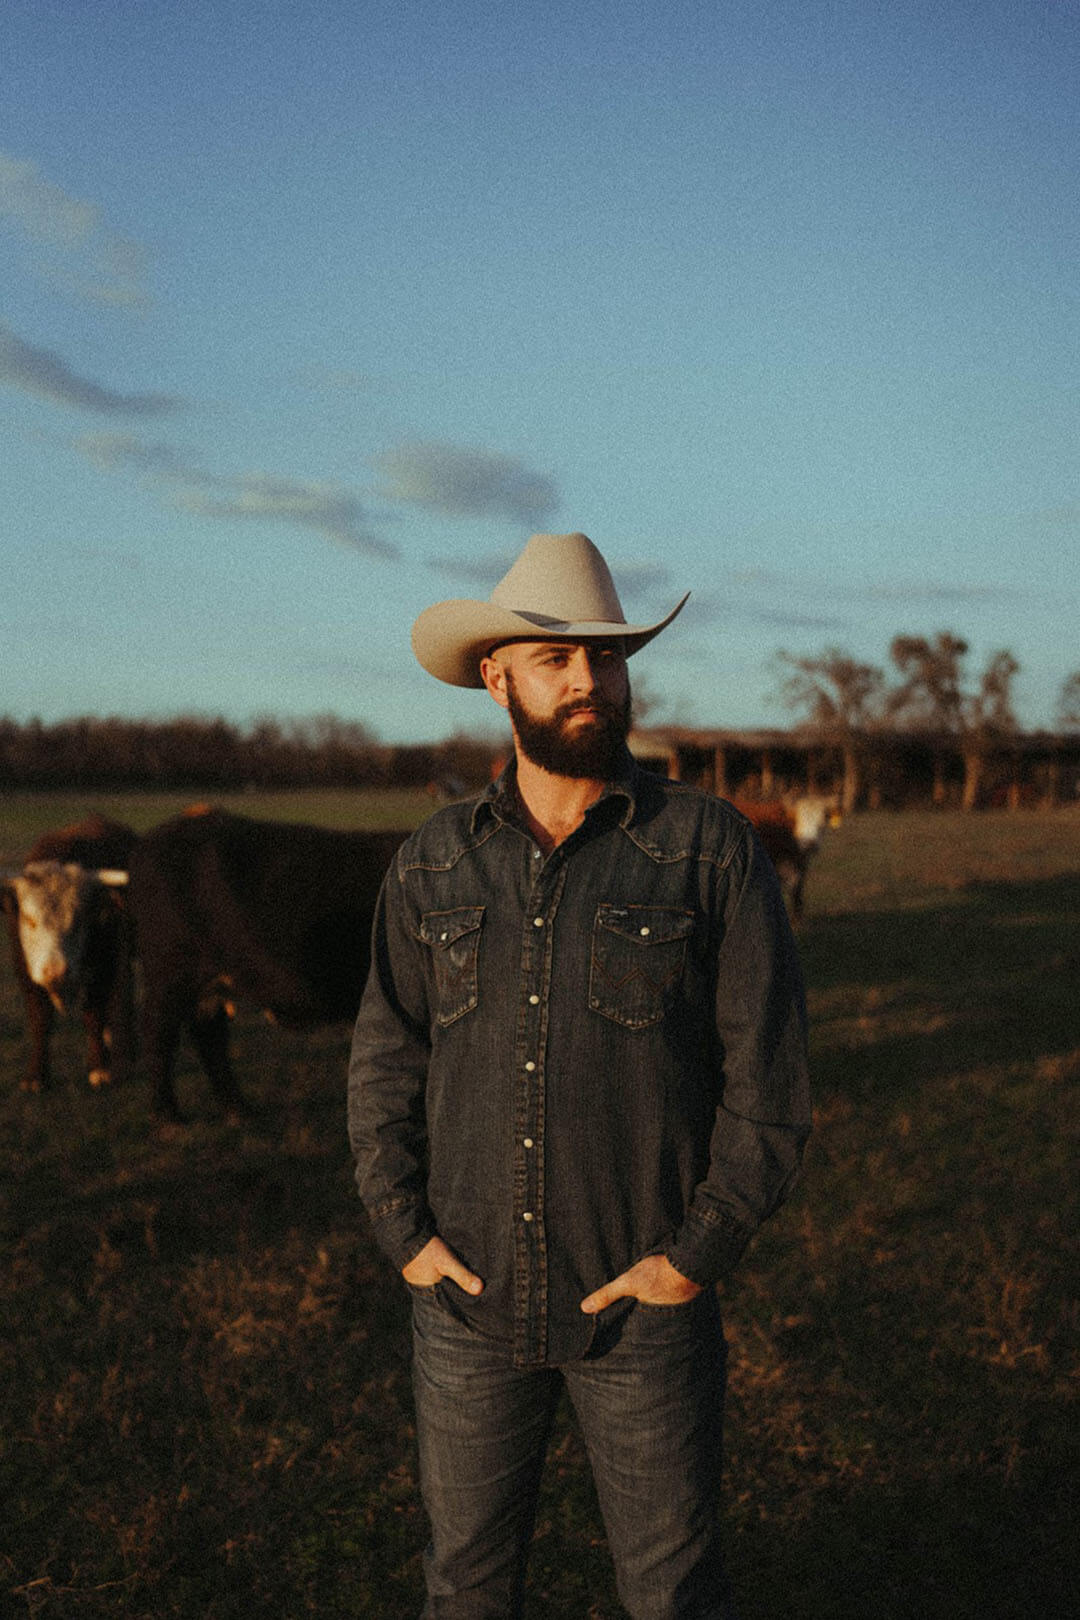 Man standing in field with cows surrouning him.  He is wearing the cowboy cut denim snap work shirt.  